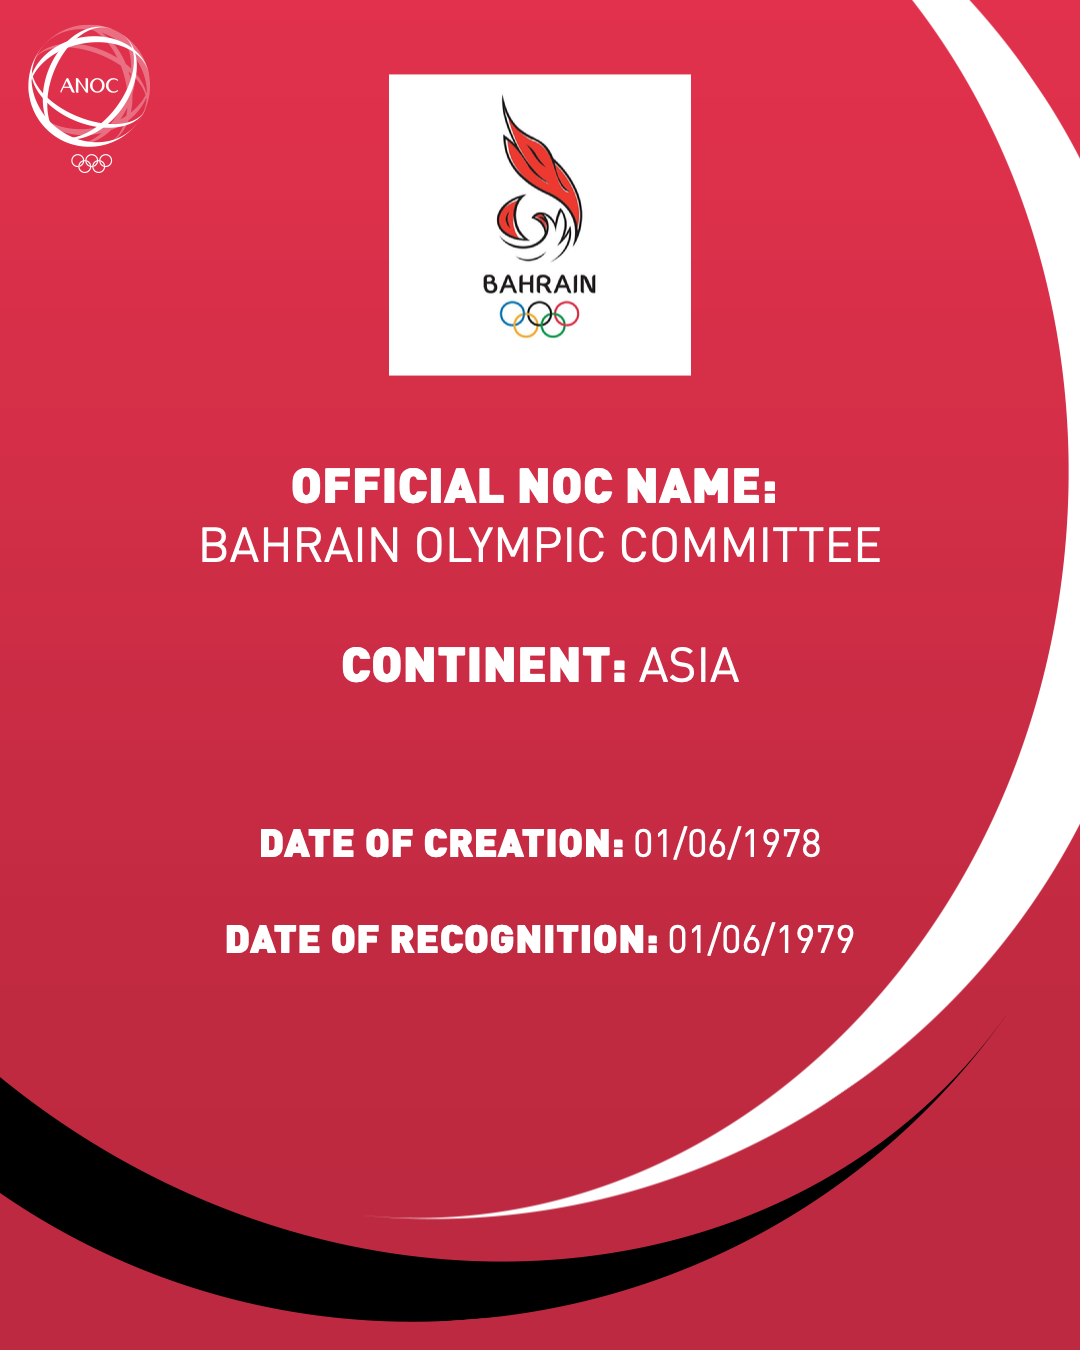 Bahrain Olympic Committee